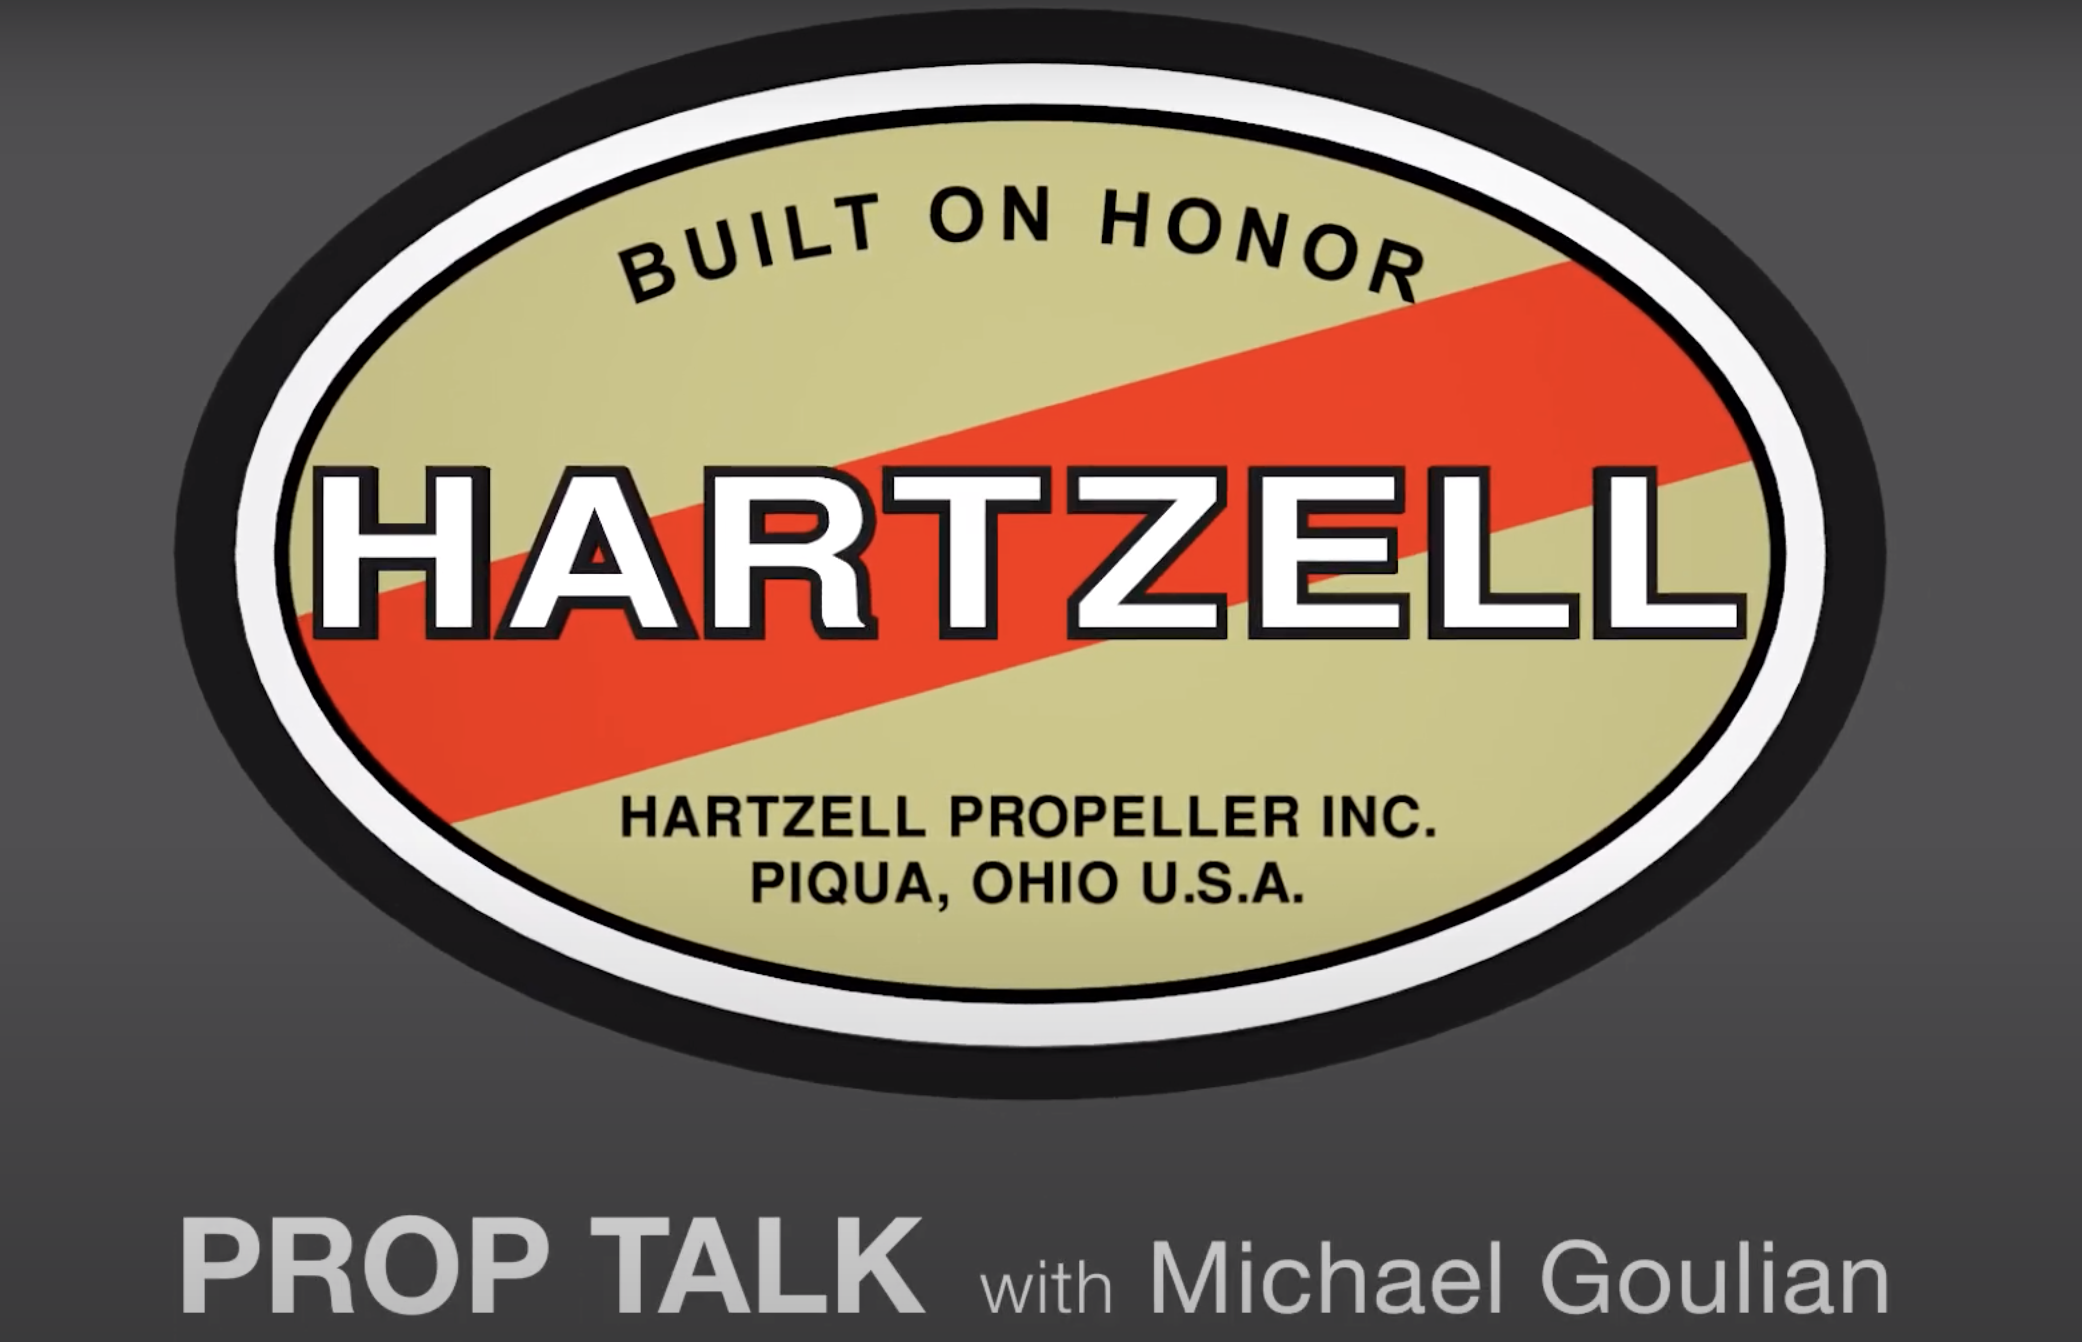 Prop Talk with Michael Goulian